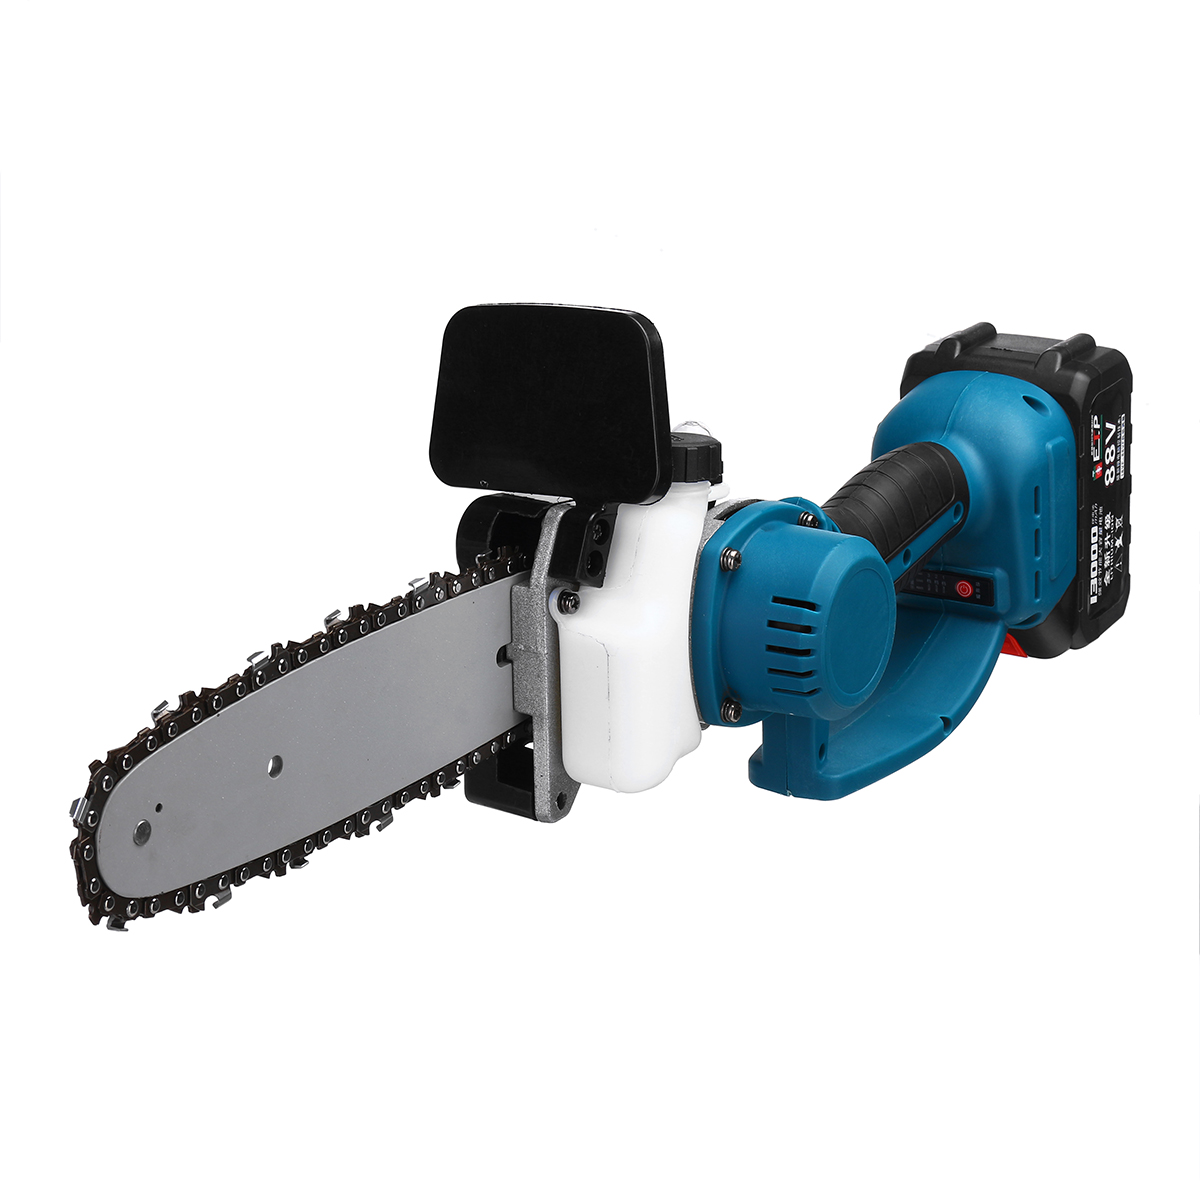 88V-1200W-8-Inch-Electric-Cordless-Chain-Saw-Woodworking-Saw-Wood-Cutter-with-Battery-1790807-6